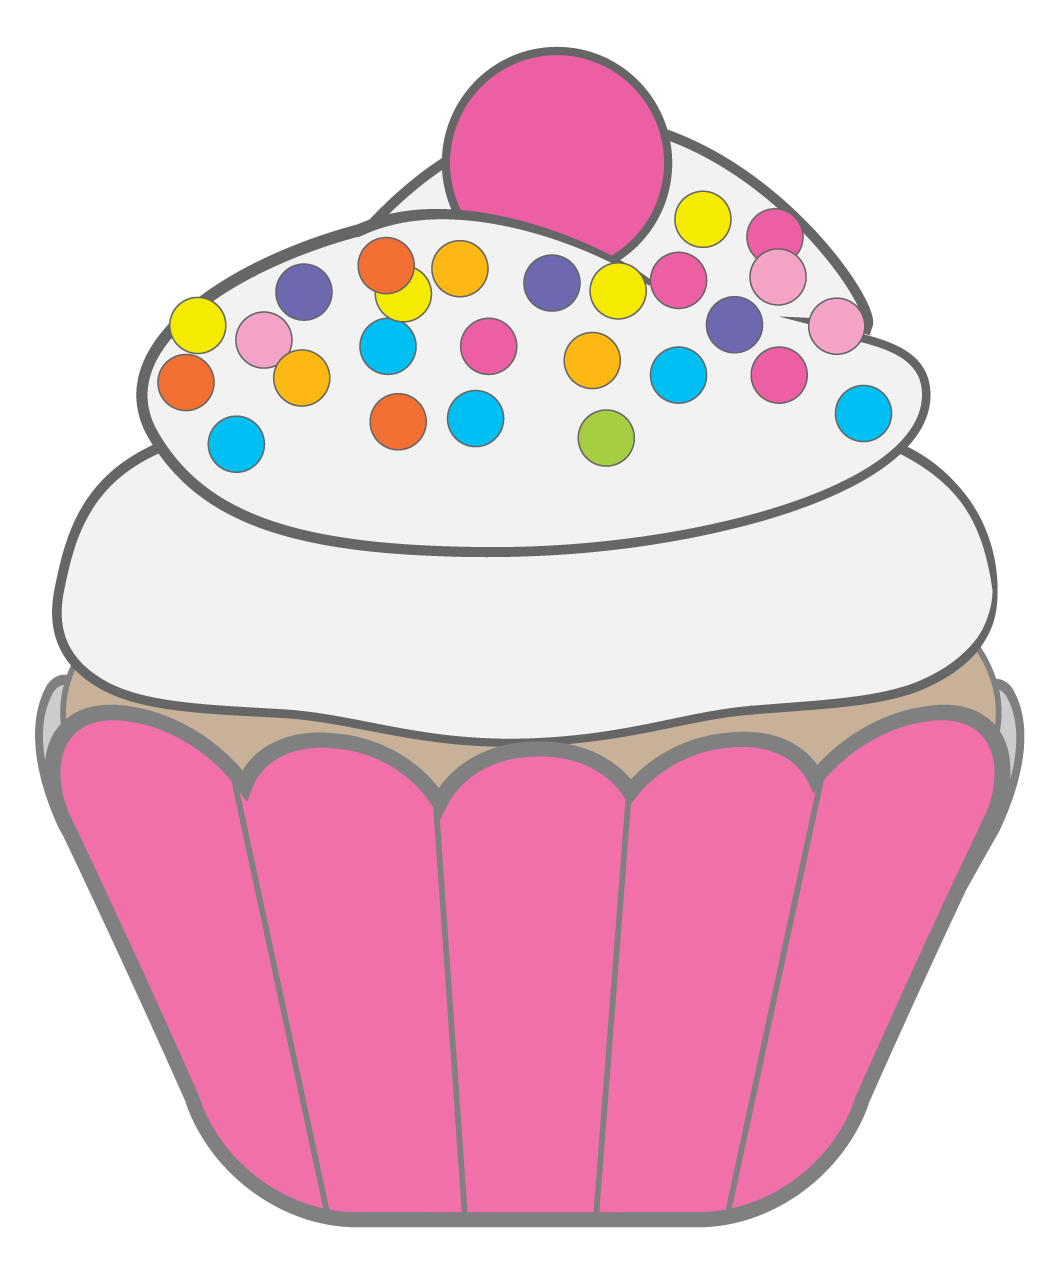 Pix For > Pink And Purple Cupcakes Clipart